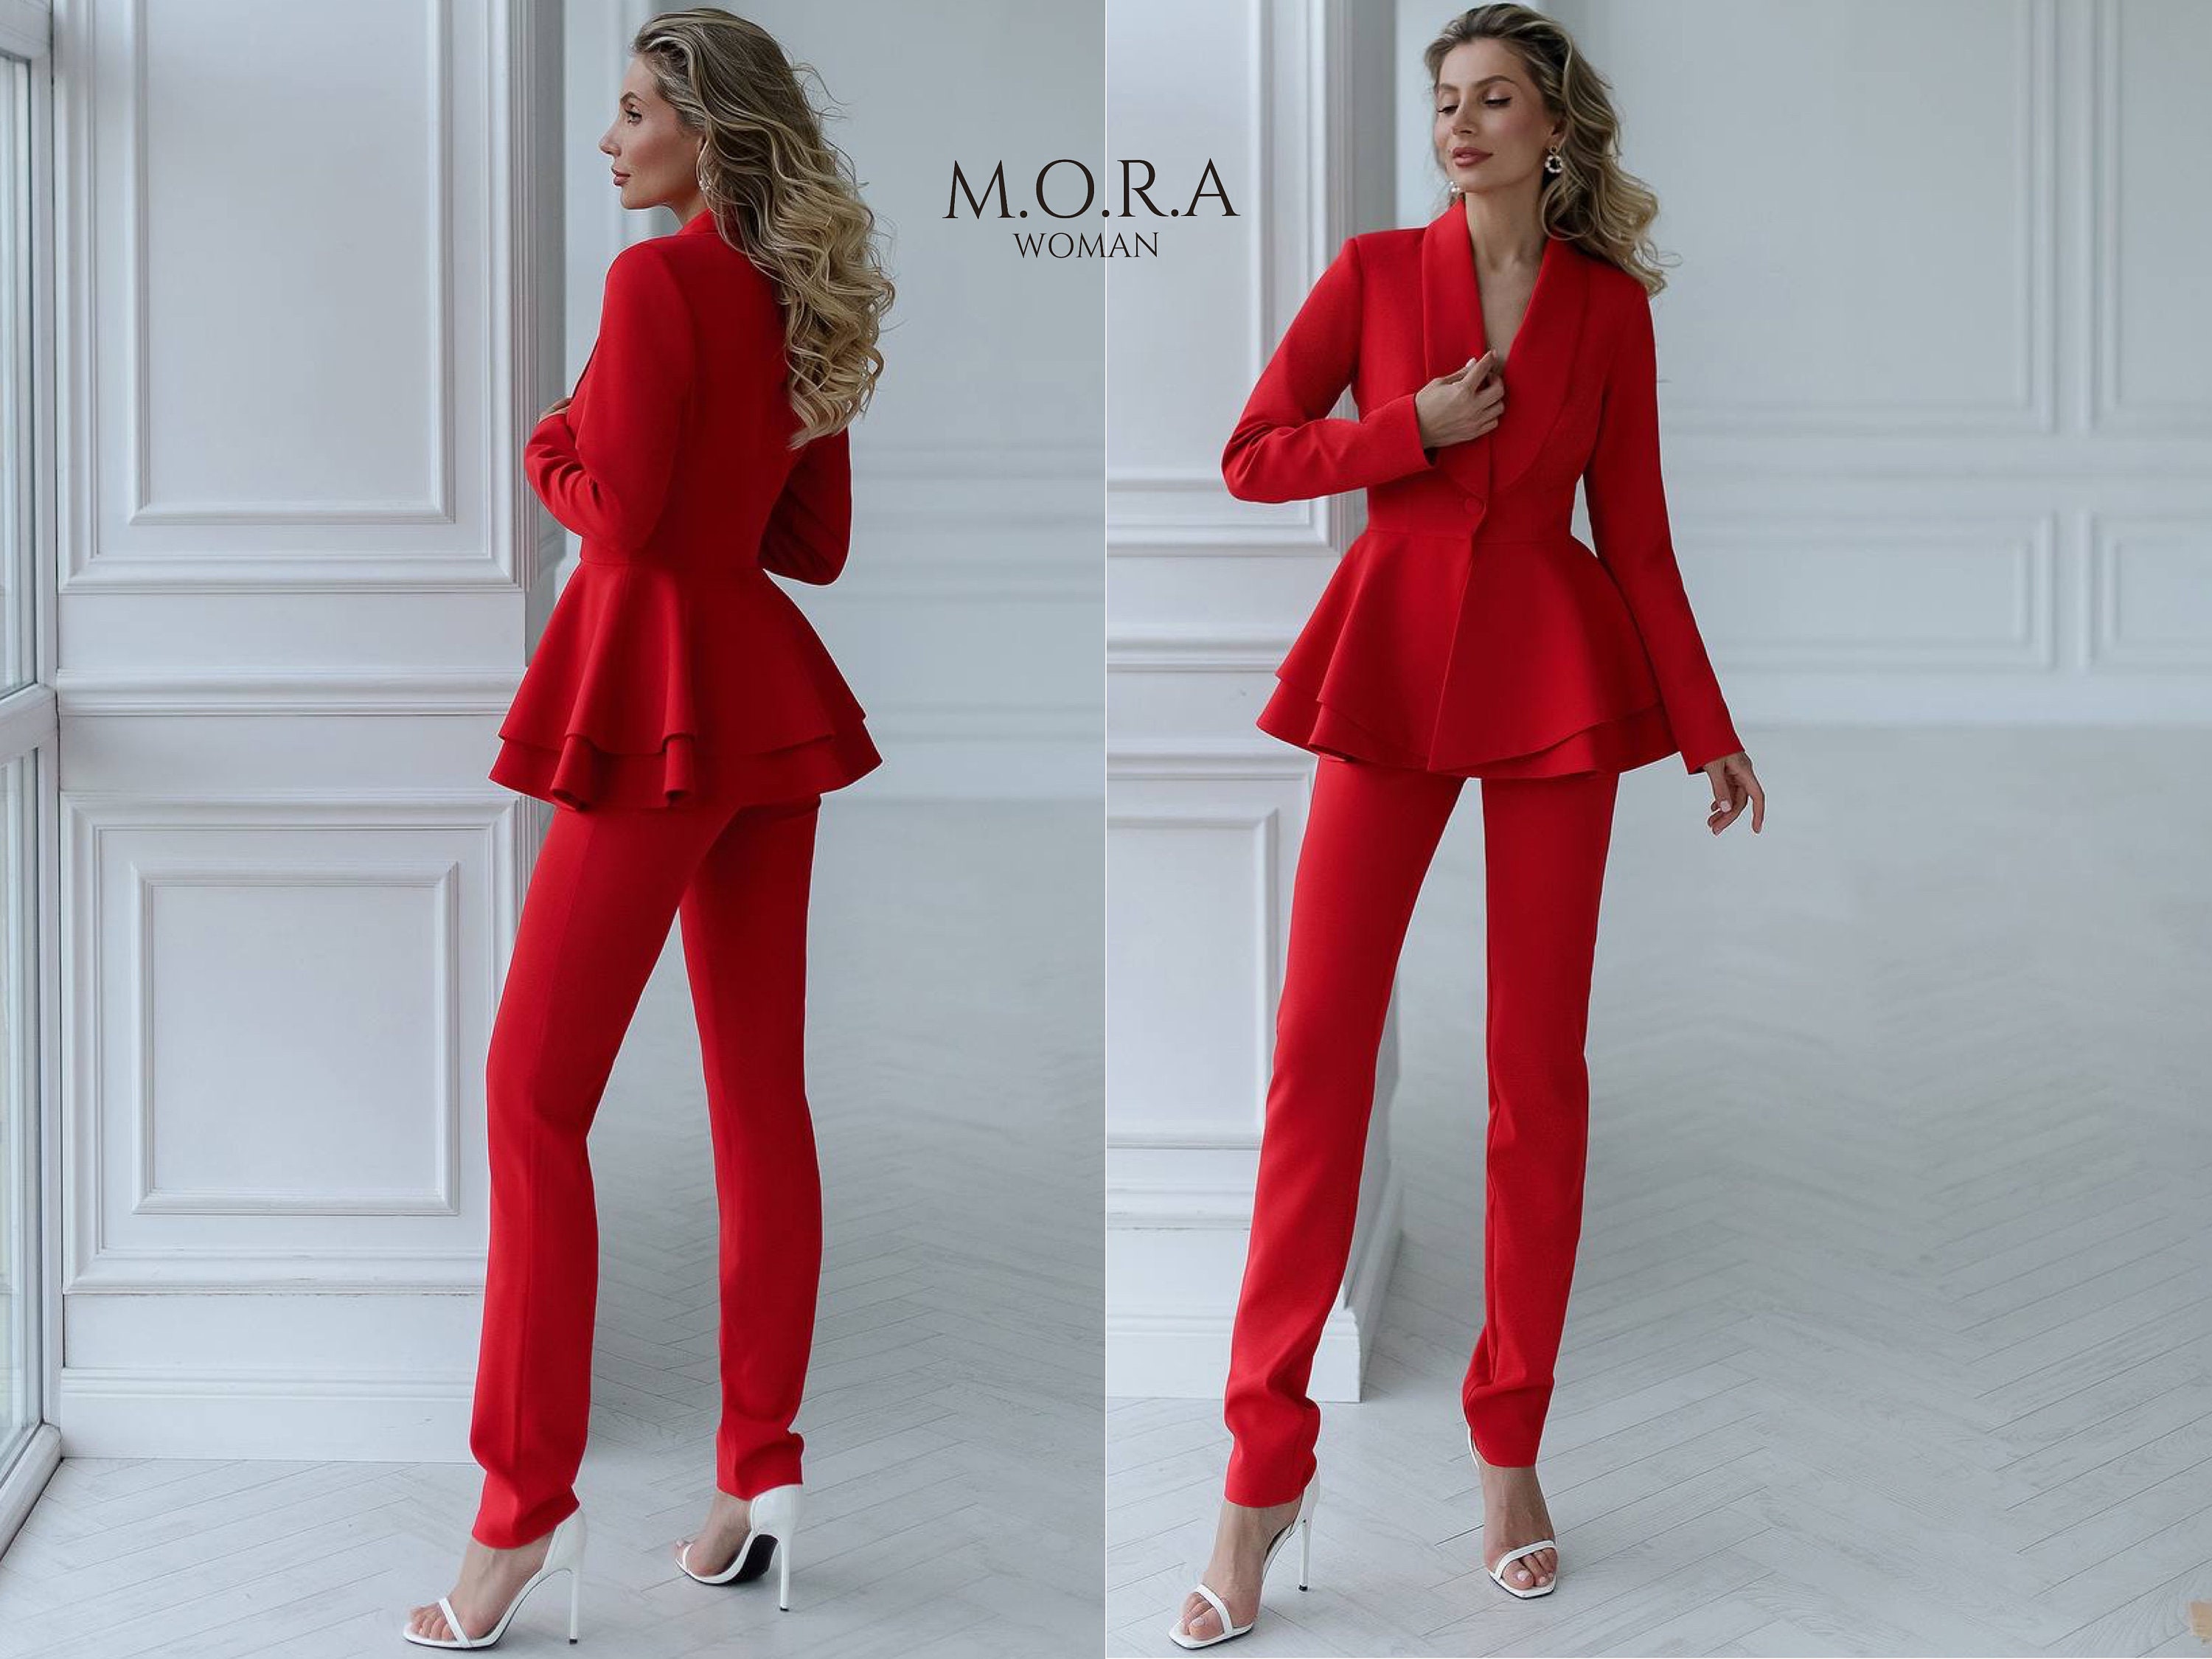 Red Women Suit, Red Suit for Women, Formal Red Suit, Flared Pants